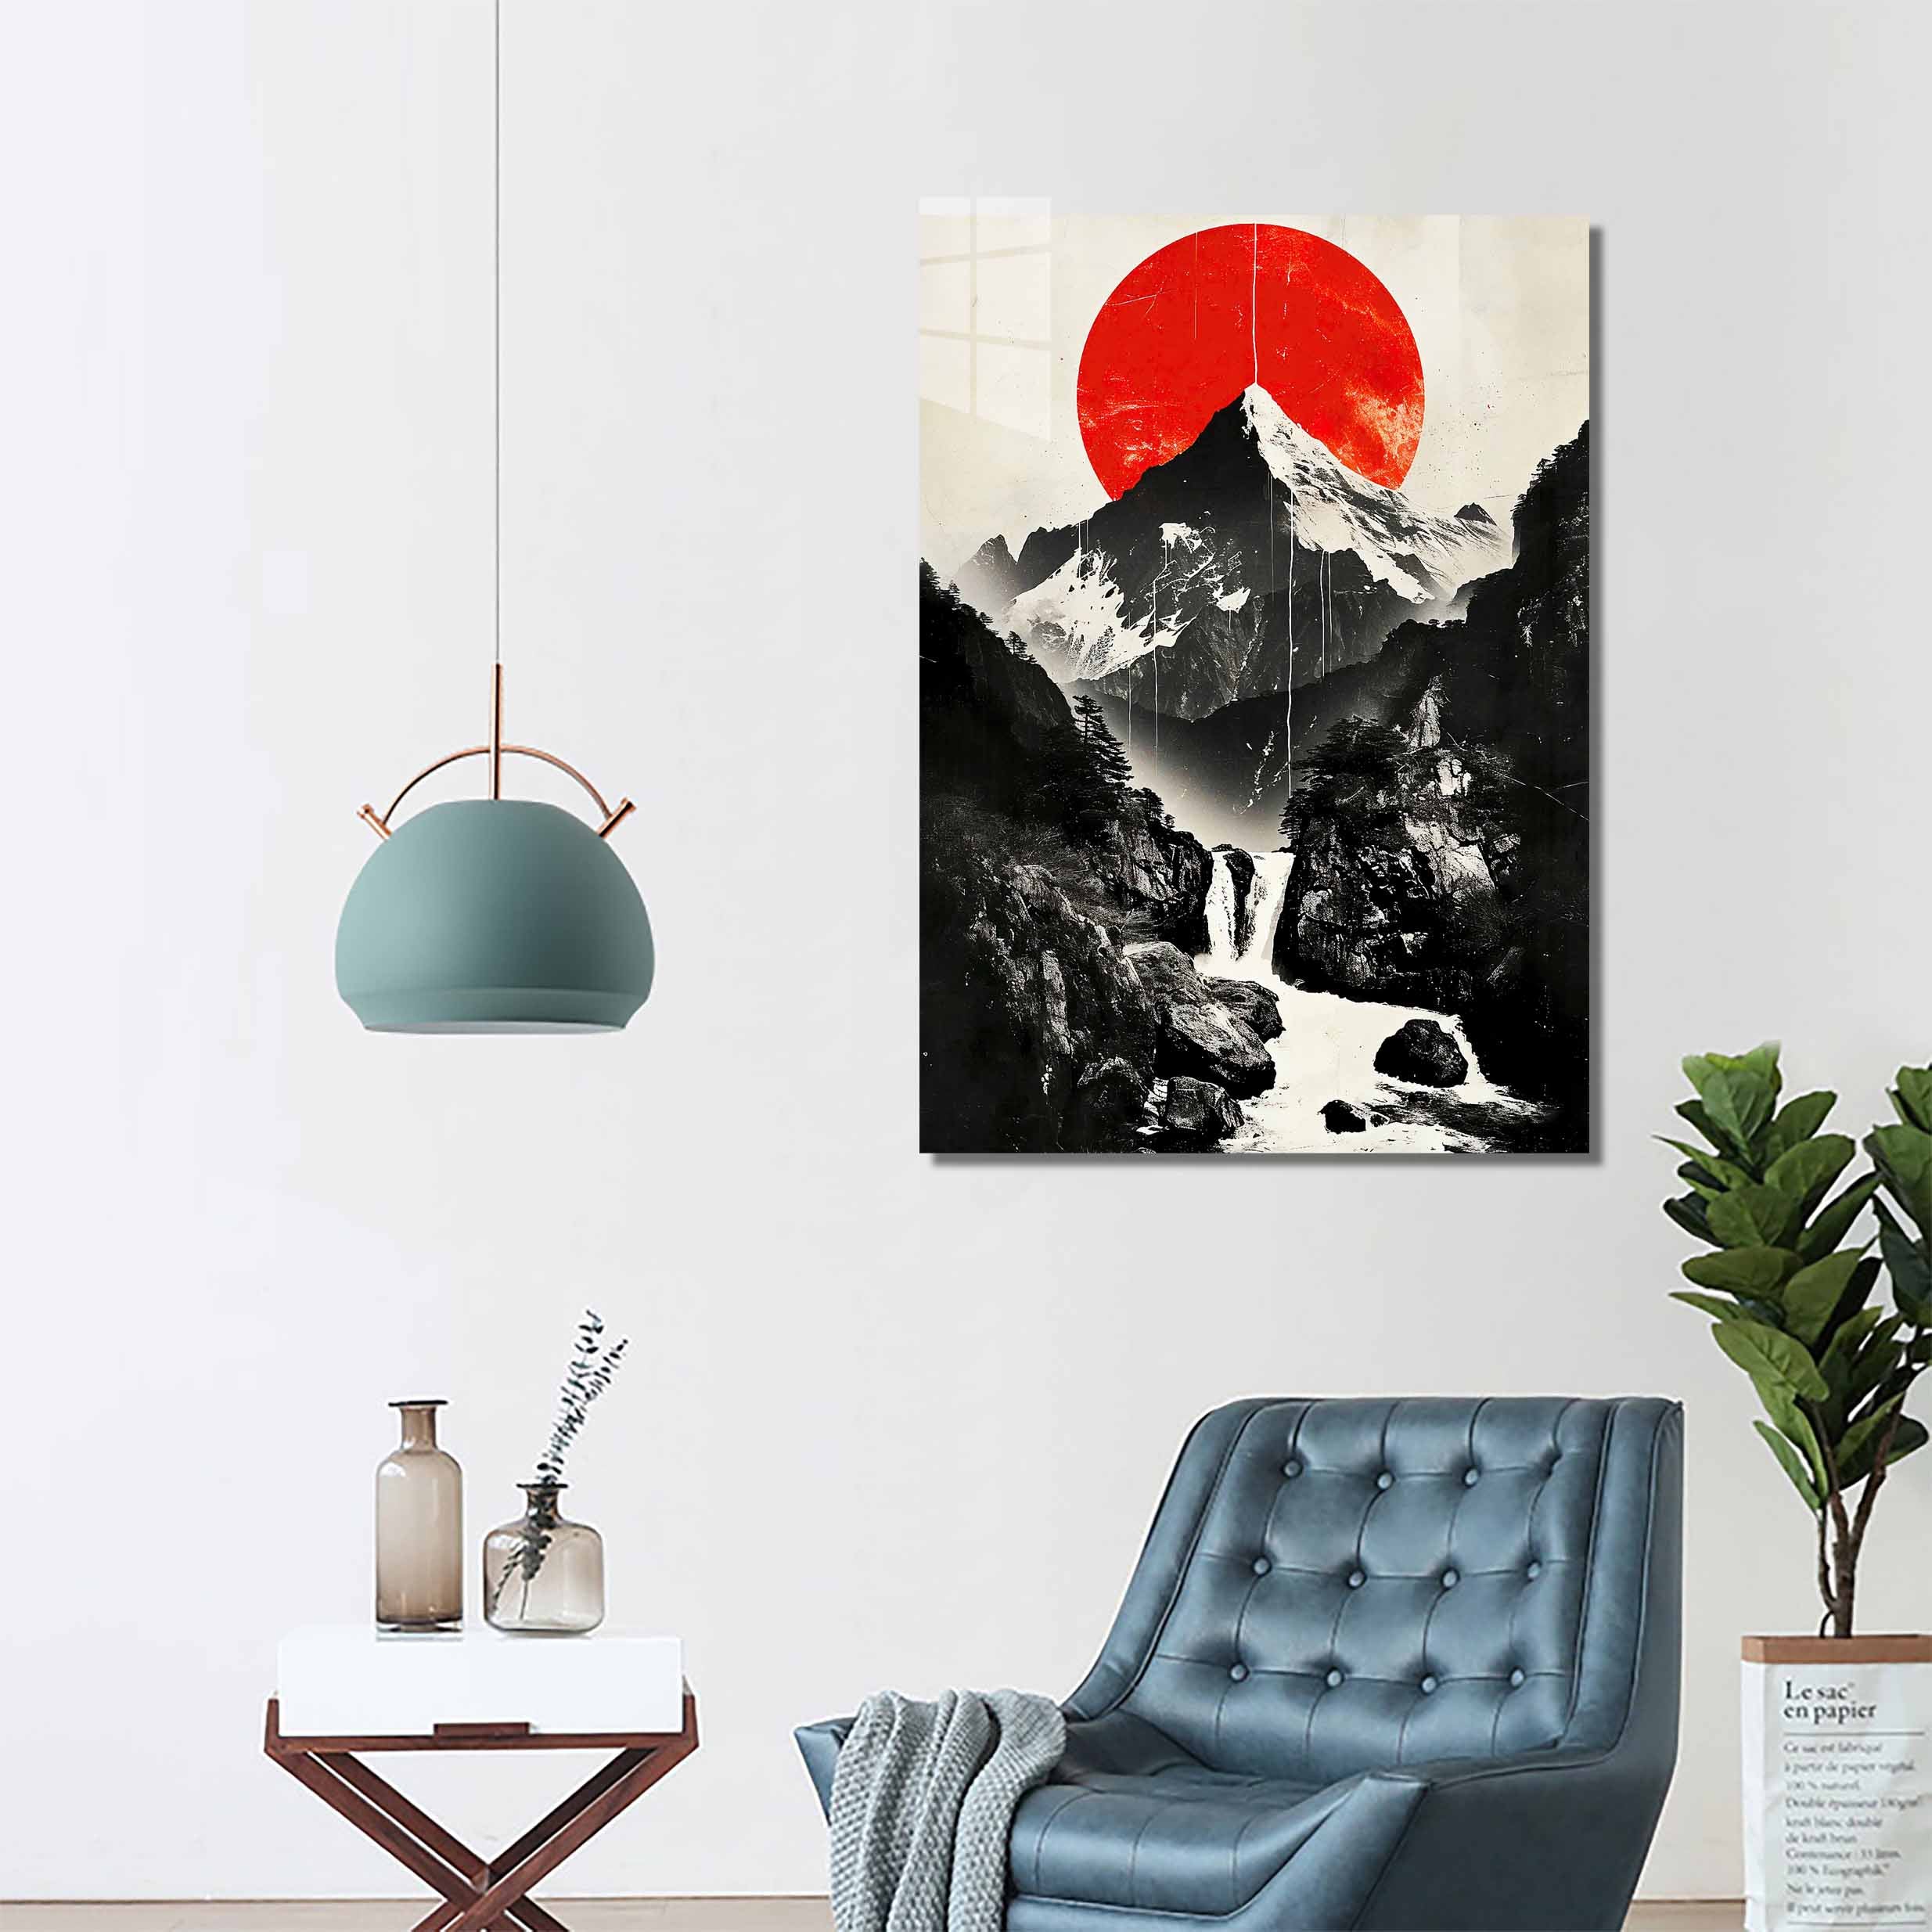 Gray Mountain in Red Moon-designed by @pozter